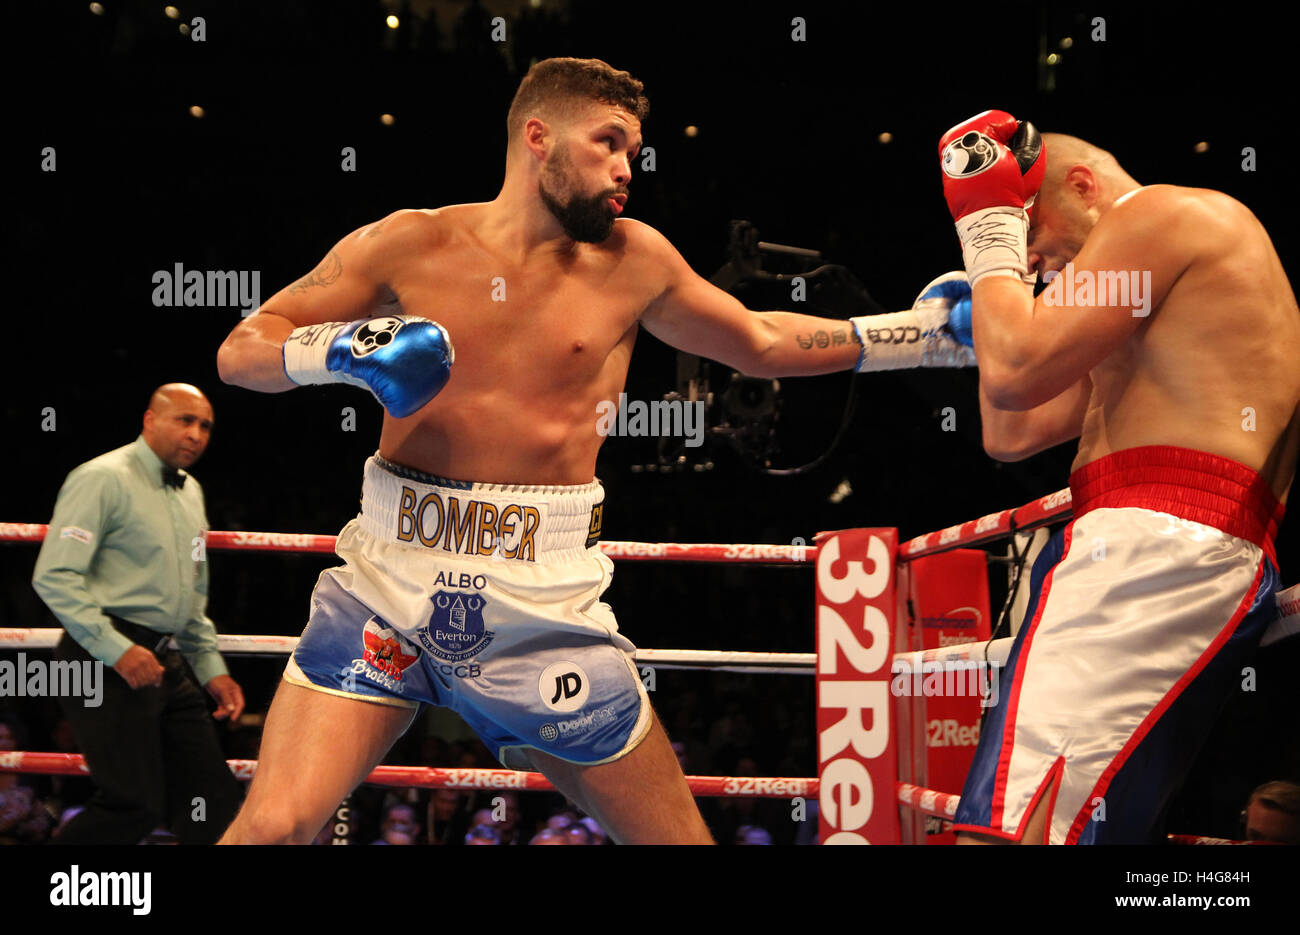 Echo Arena, Liverpool , UK 15th October 2016. Tony Bellew v BJ Flores Matchroom Boxing Fight Night.  Tony Bellew (Liverpool)  vs  BJ Flores (USA) during their WBC World Cruiserweight  Championship bout at Echo Arena, Liverpool  Credit: Stephen Gaunt/Touchlinepics.com/Alamy Live News Stock Photo